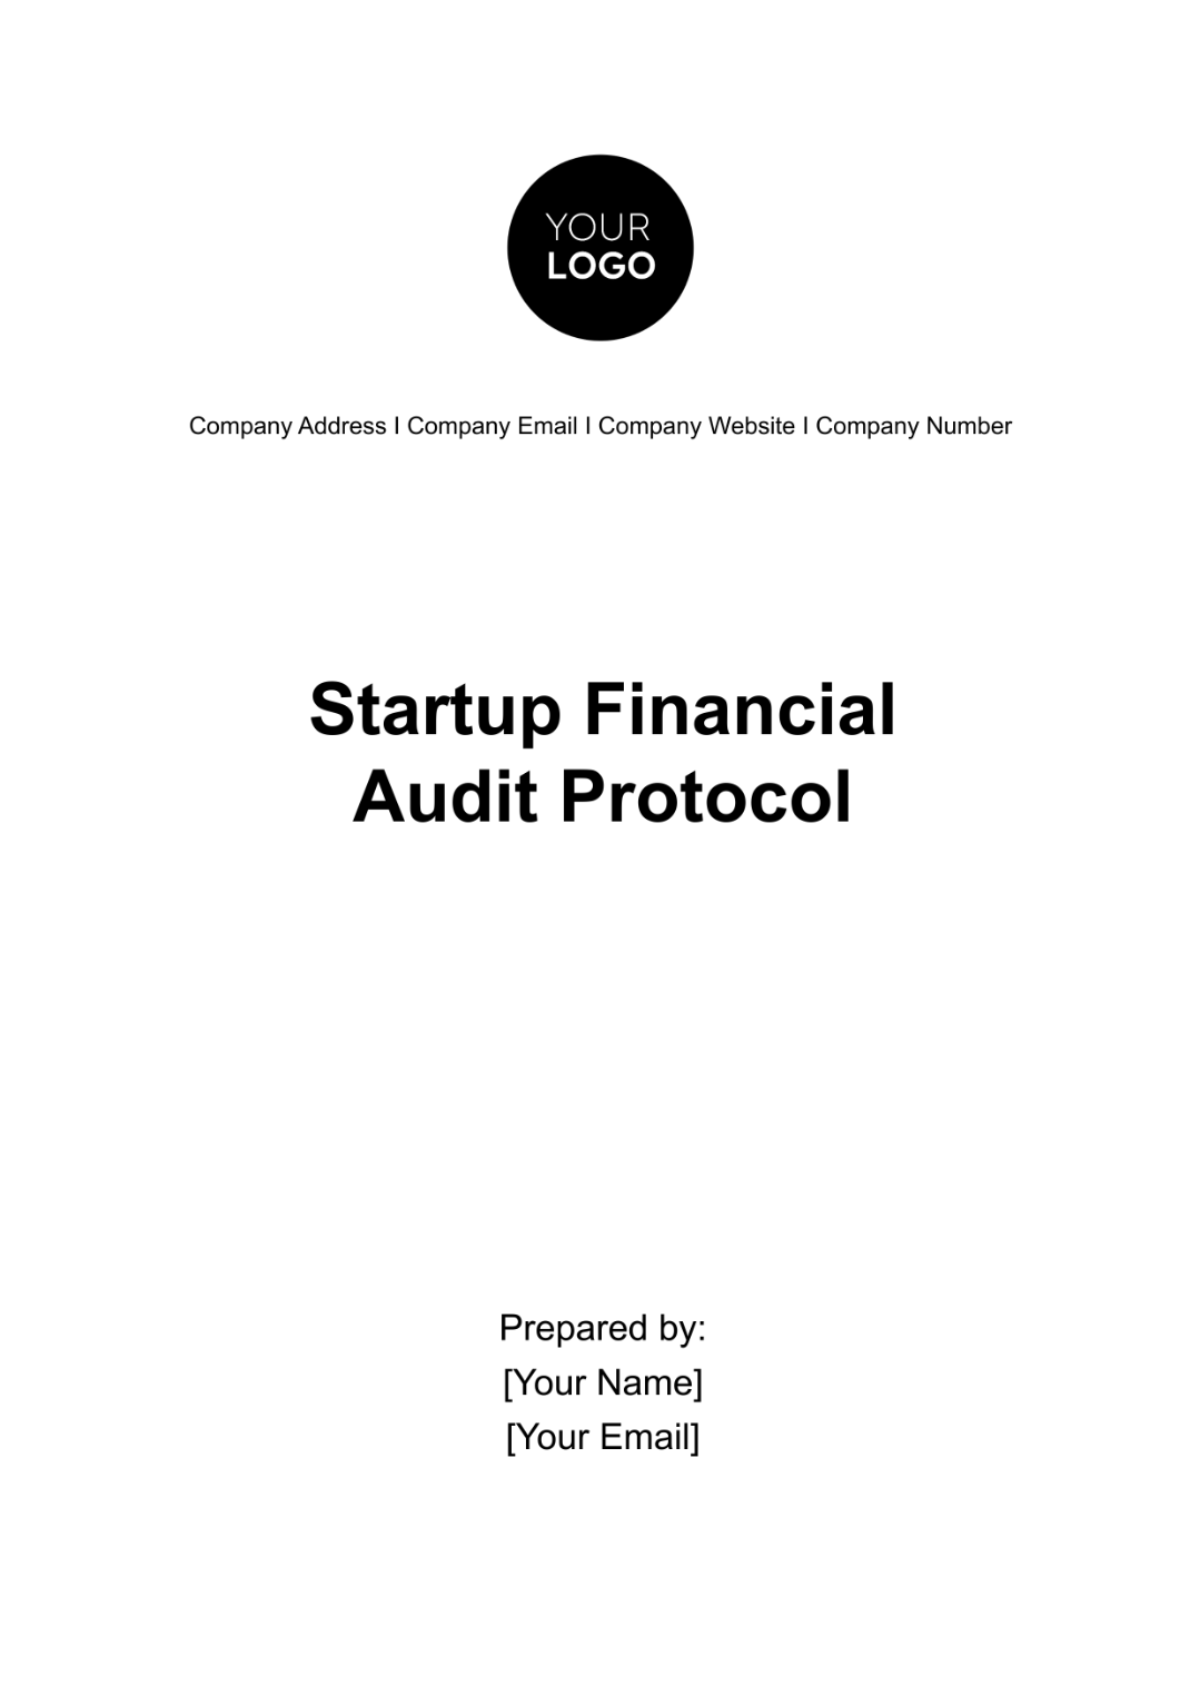 Startup Financial Audit Protocol Template